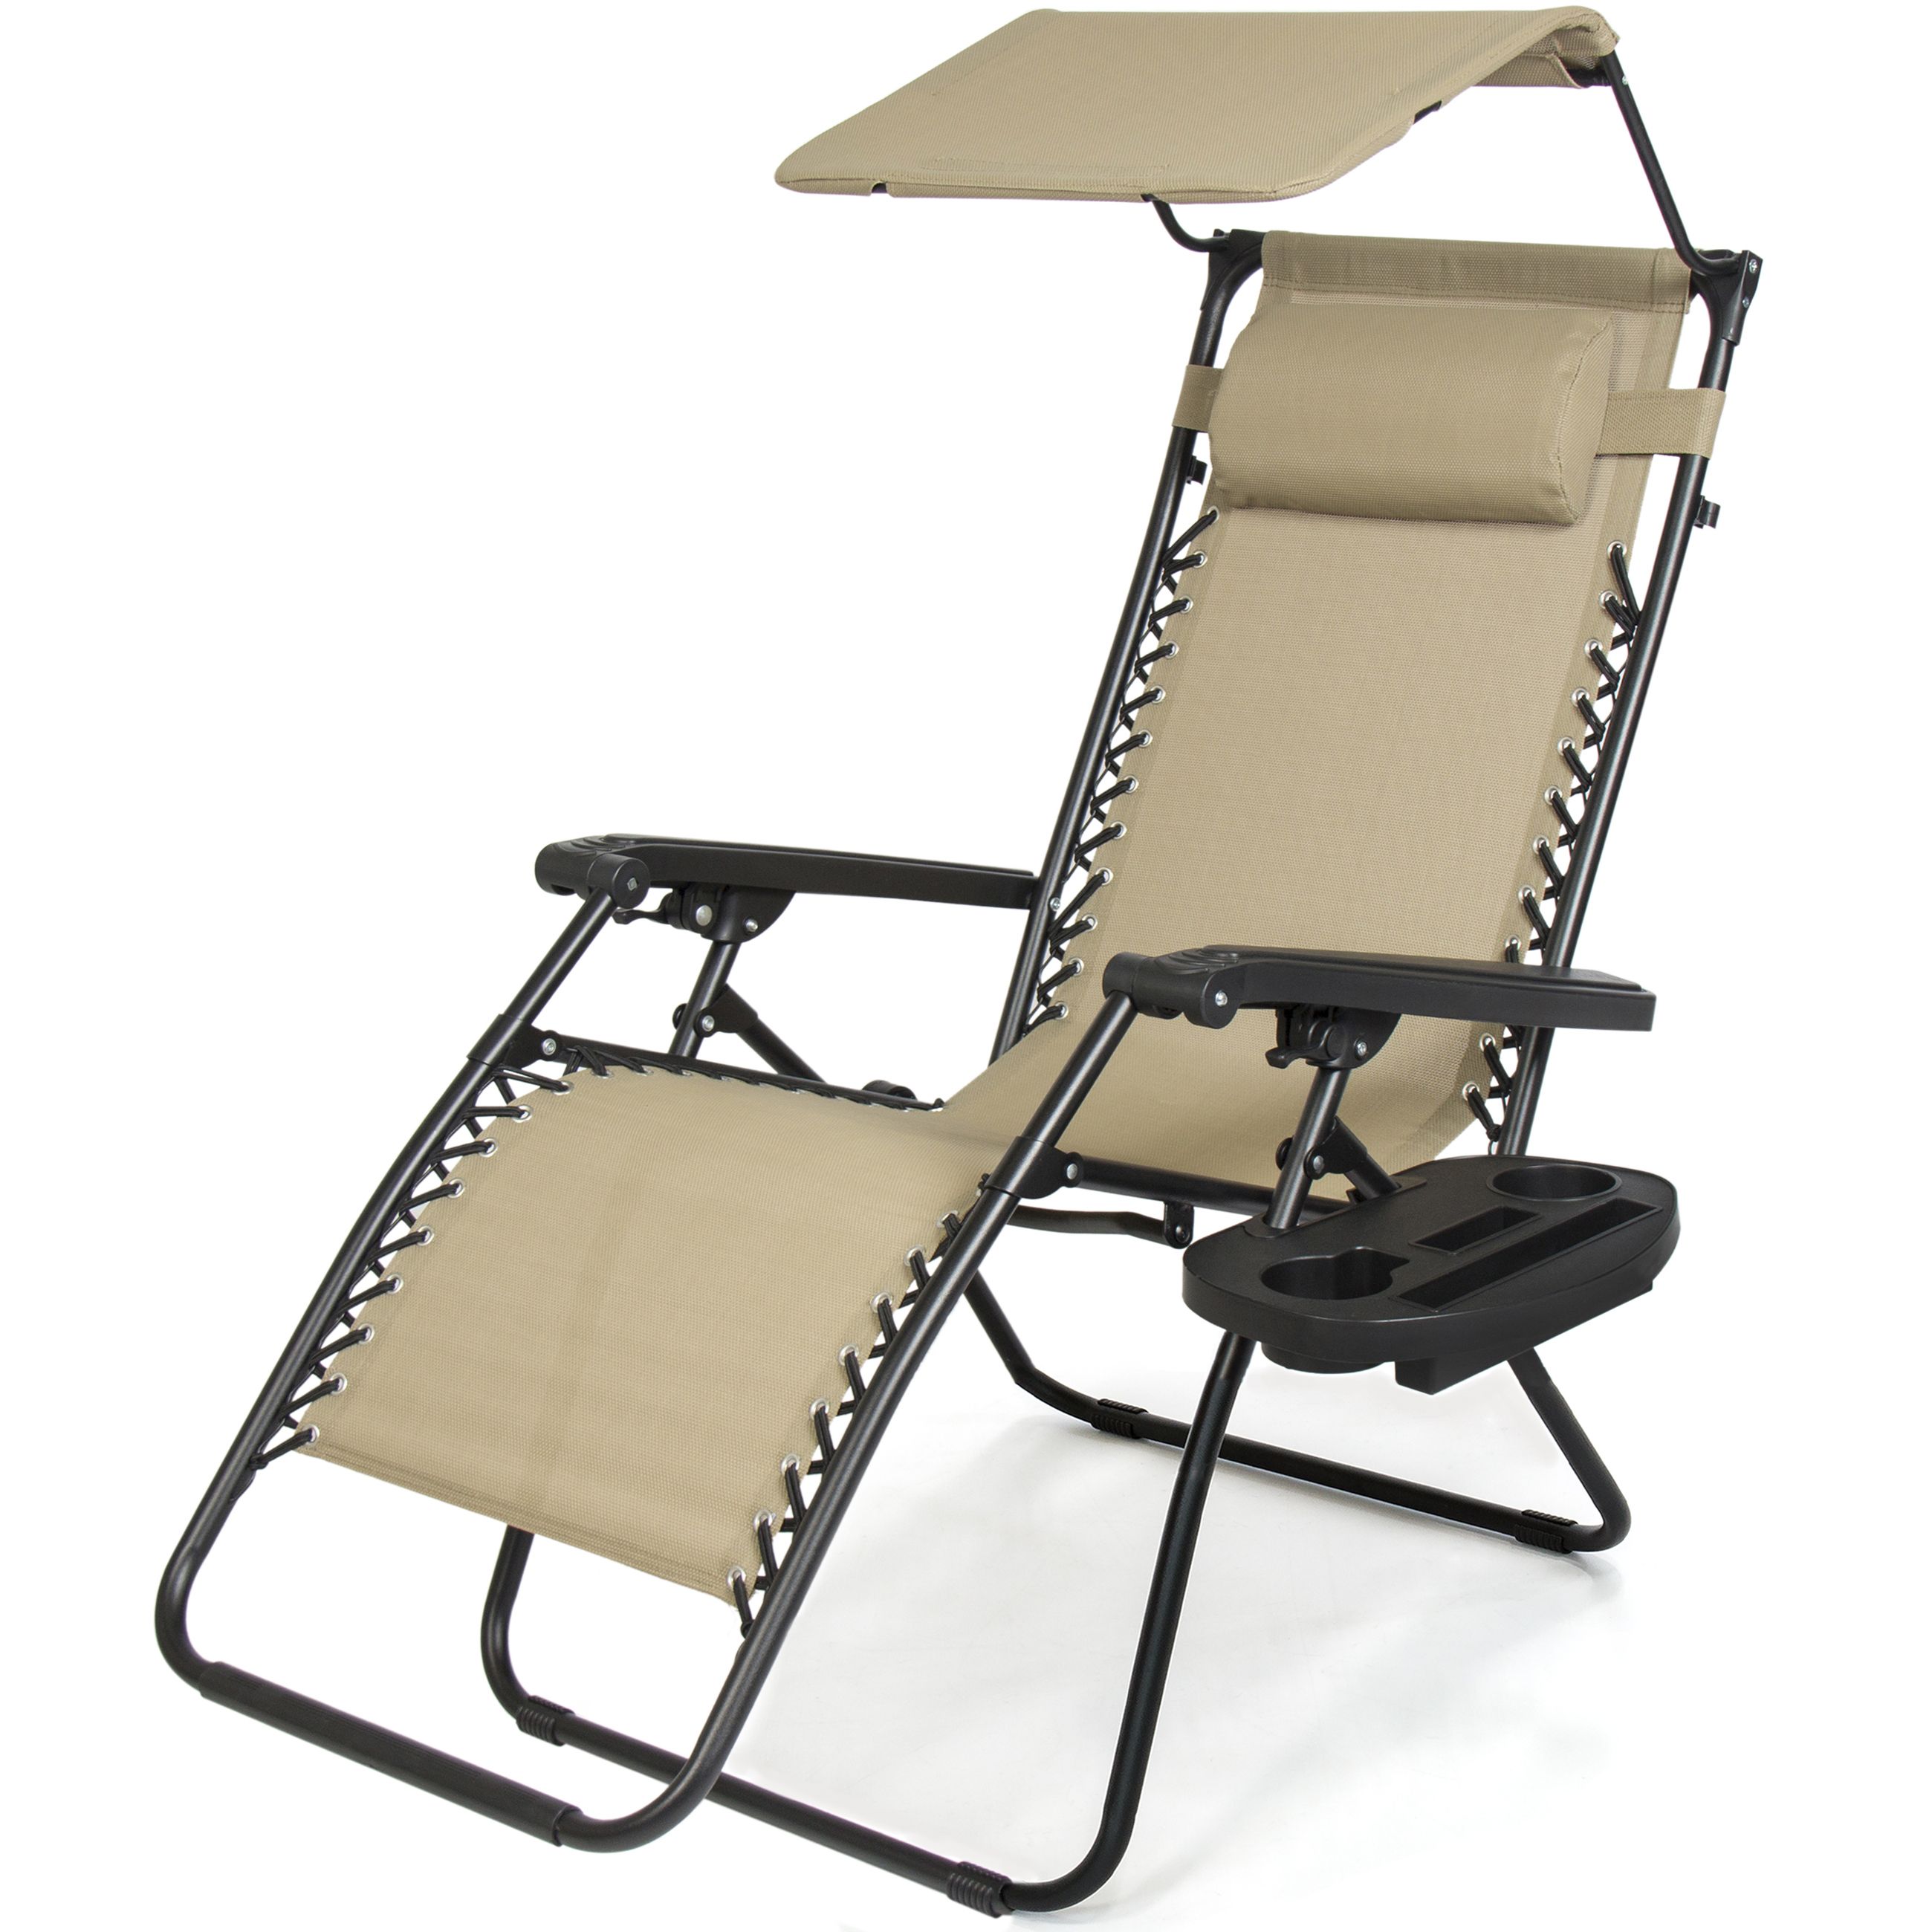 Best Choice Products Folding Steel Mesh Zero Gravity Recliner Lounge Chair  W/ Adjustable Canopy Shade And Cup Holder Accessory Tray, Beige – Within Current Garden Oversized Chairs With Sunshade And Drink Tray (View 5 of 25)